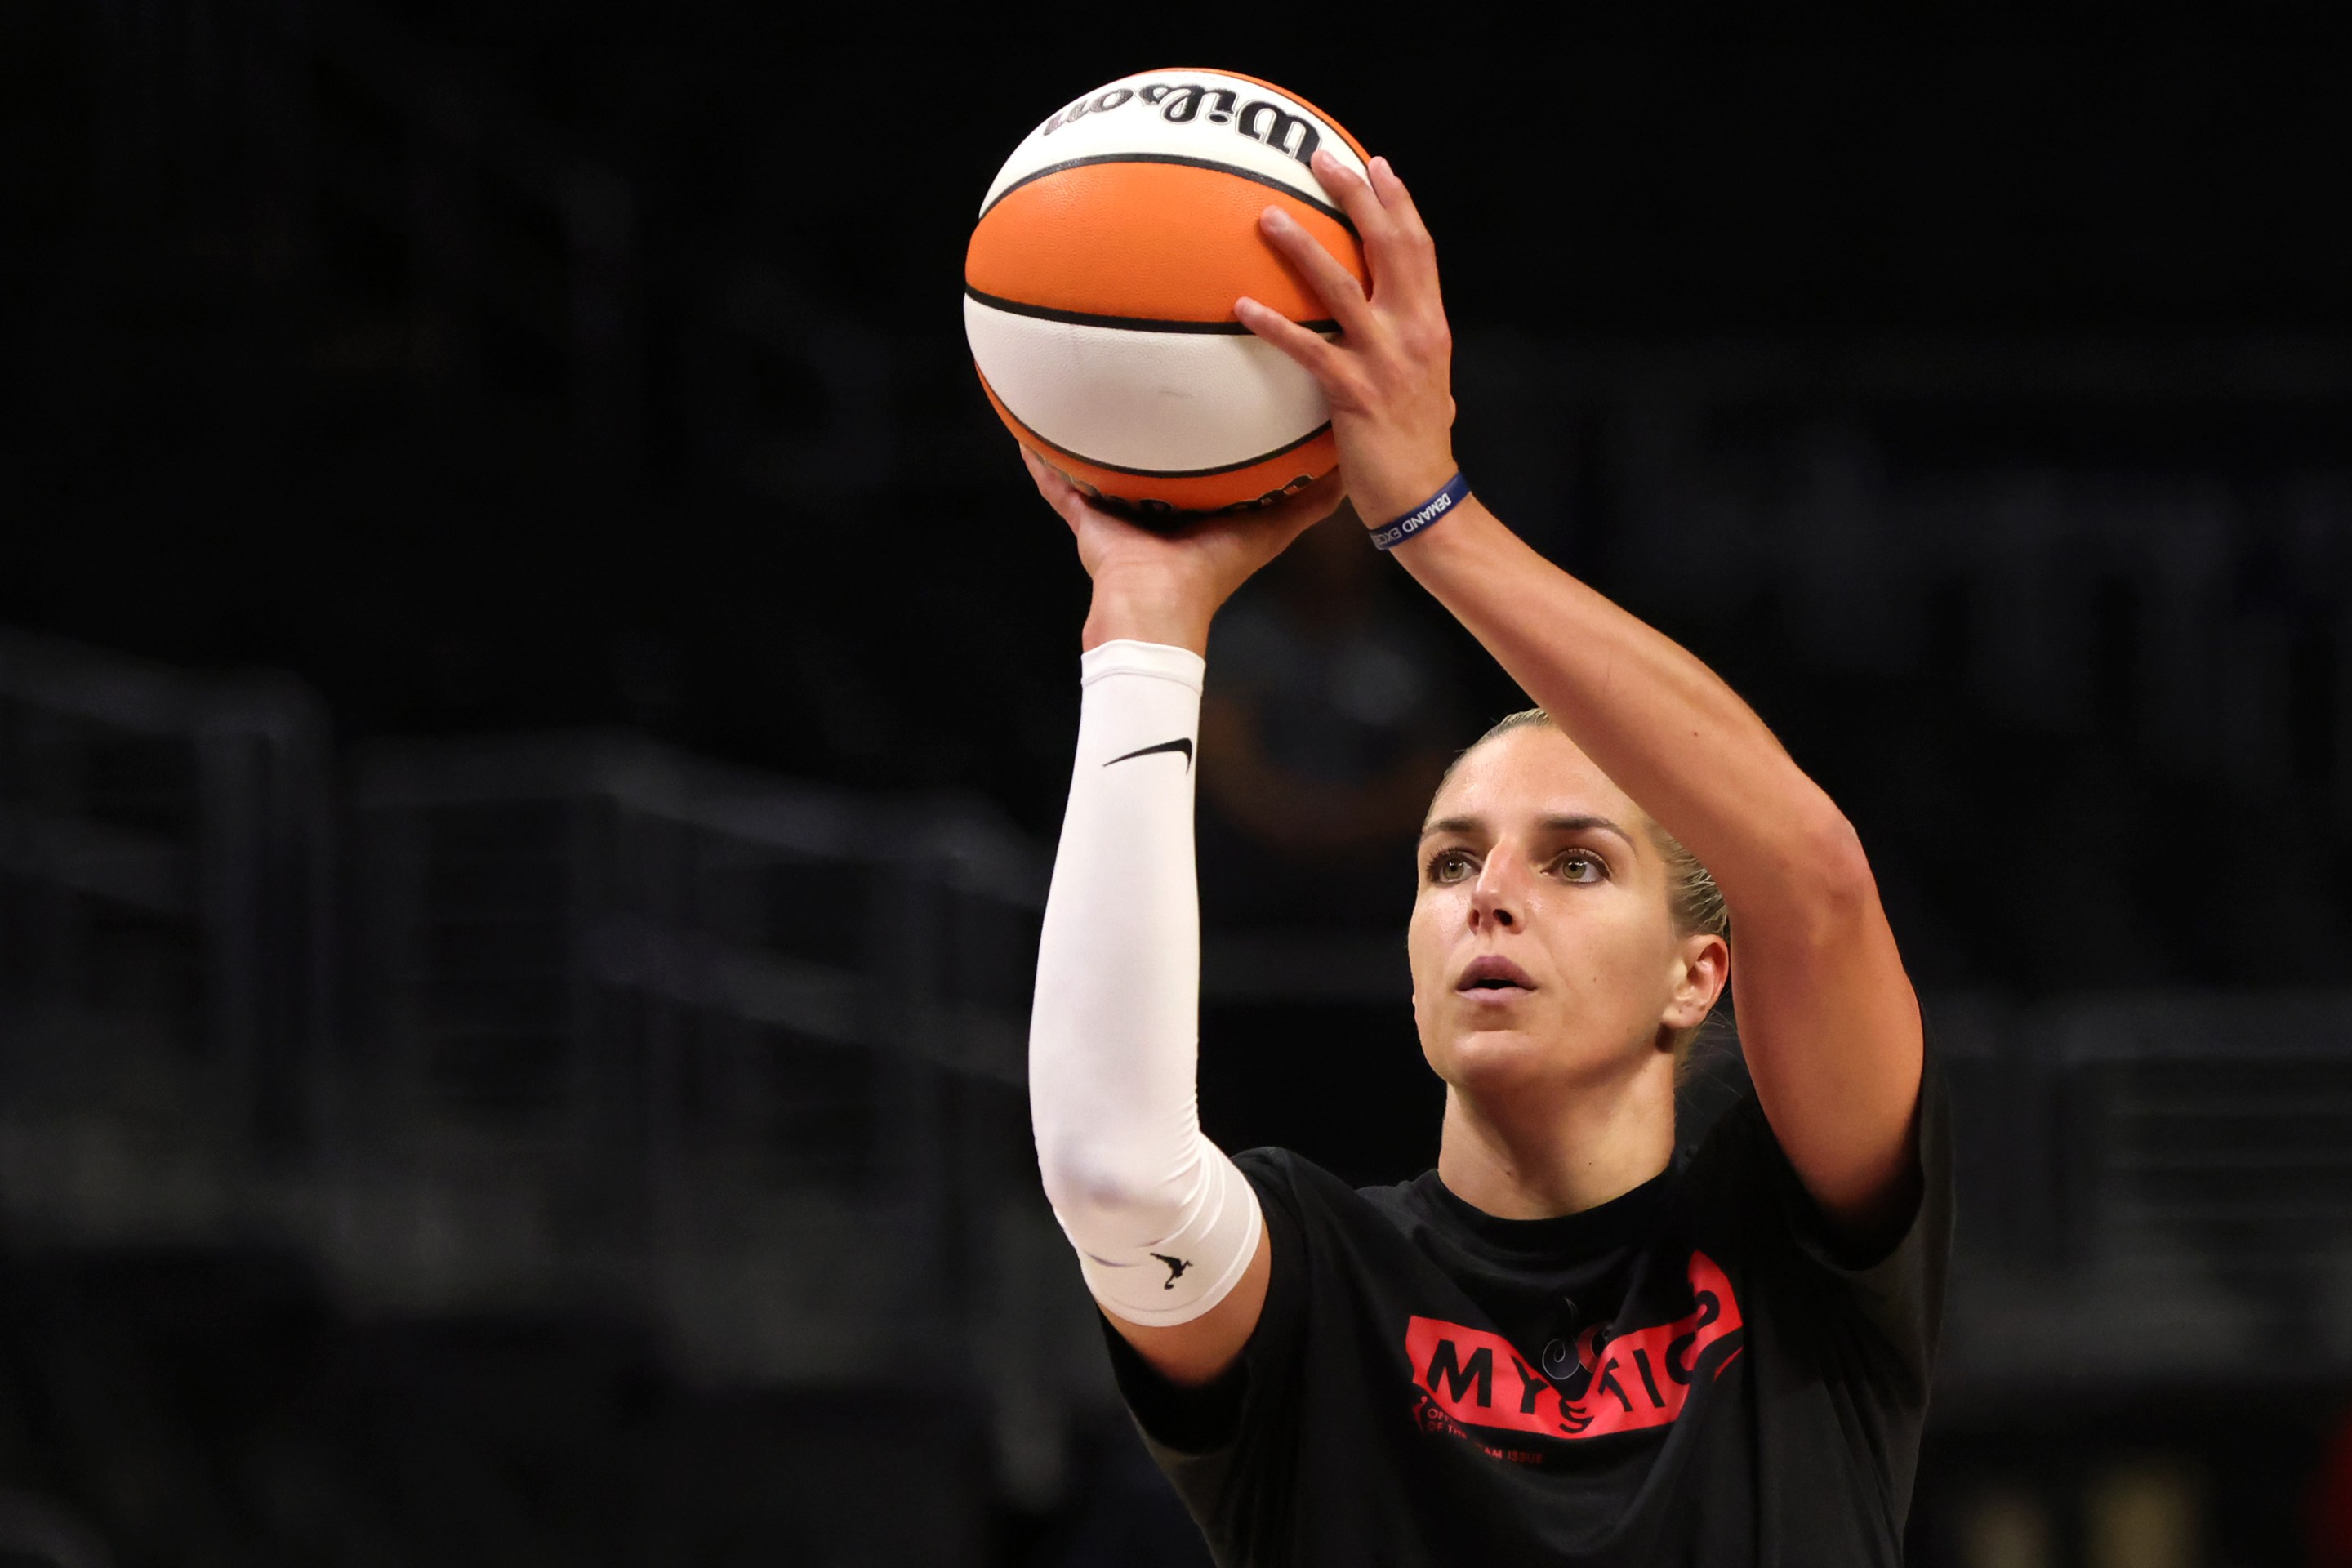 LOS ANGELES, CALIFORNIA - JULY 12: Elena Delle Donne #11 of the Washington Mystics warms up ahead of a game against the Los Angeles Sparks at Crypto.com Arena on July 12, 2022 in Los Angeles, California.